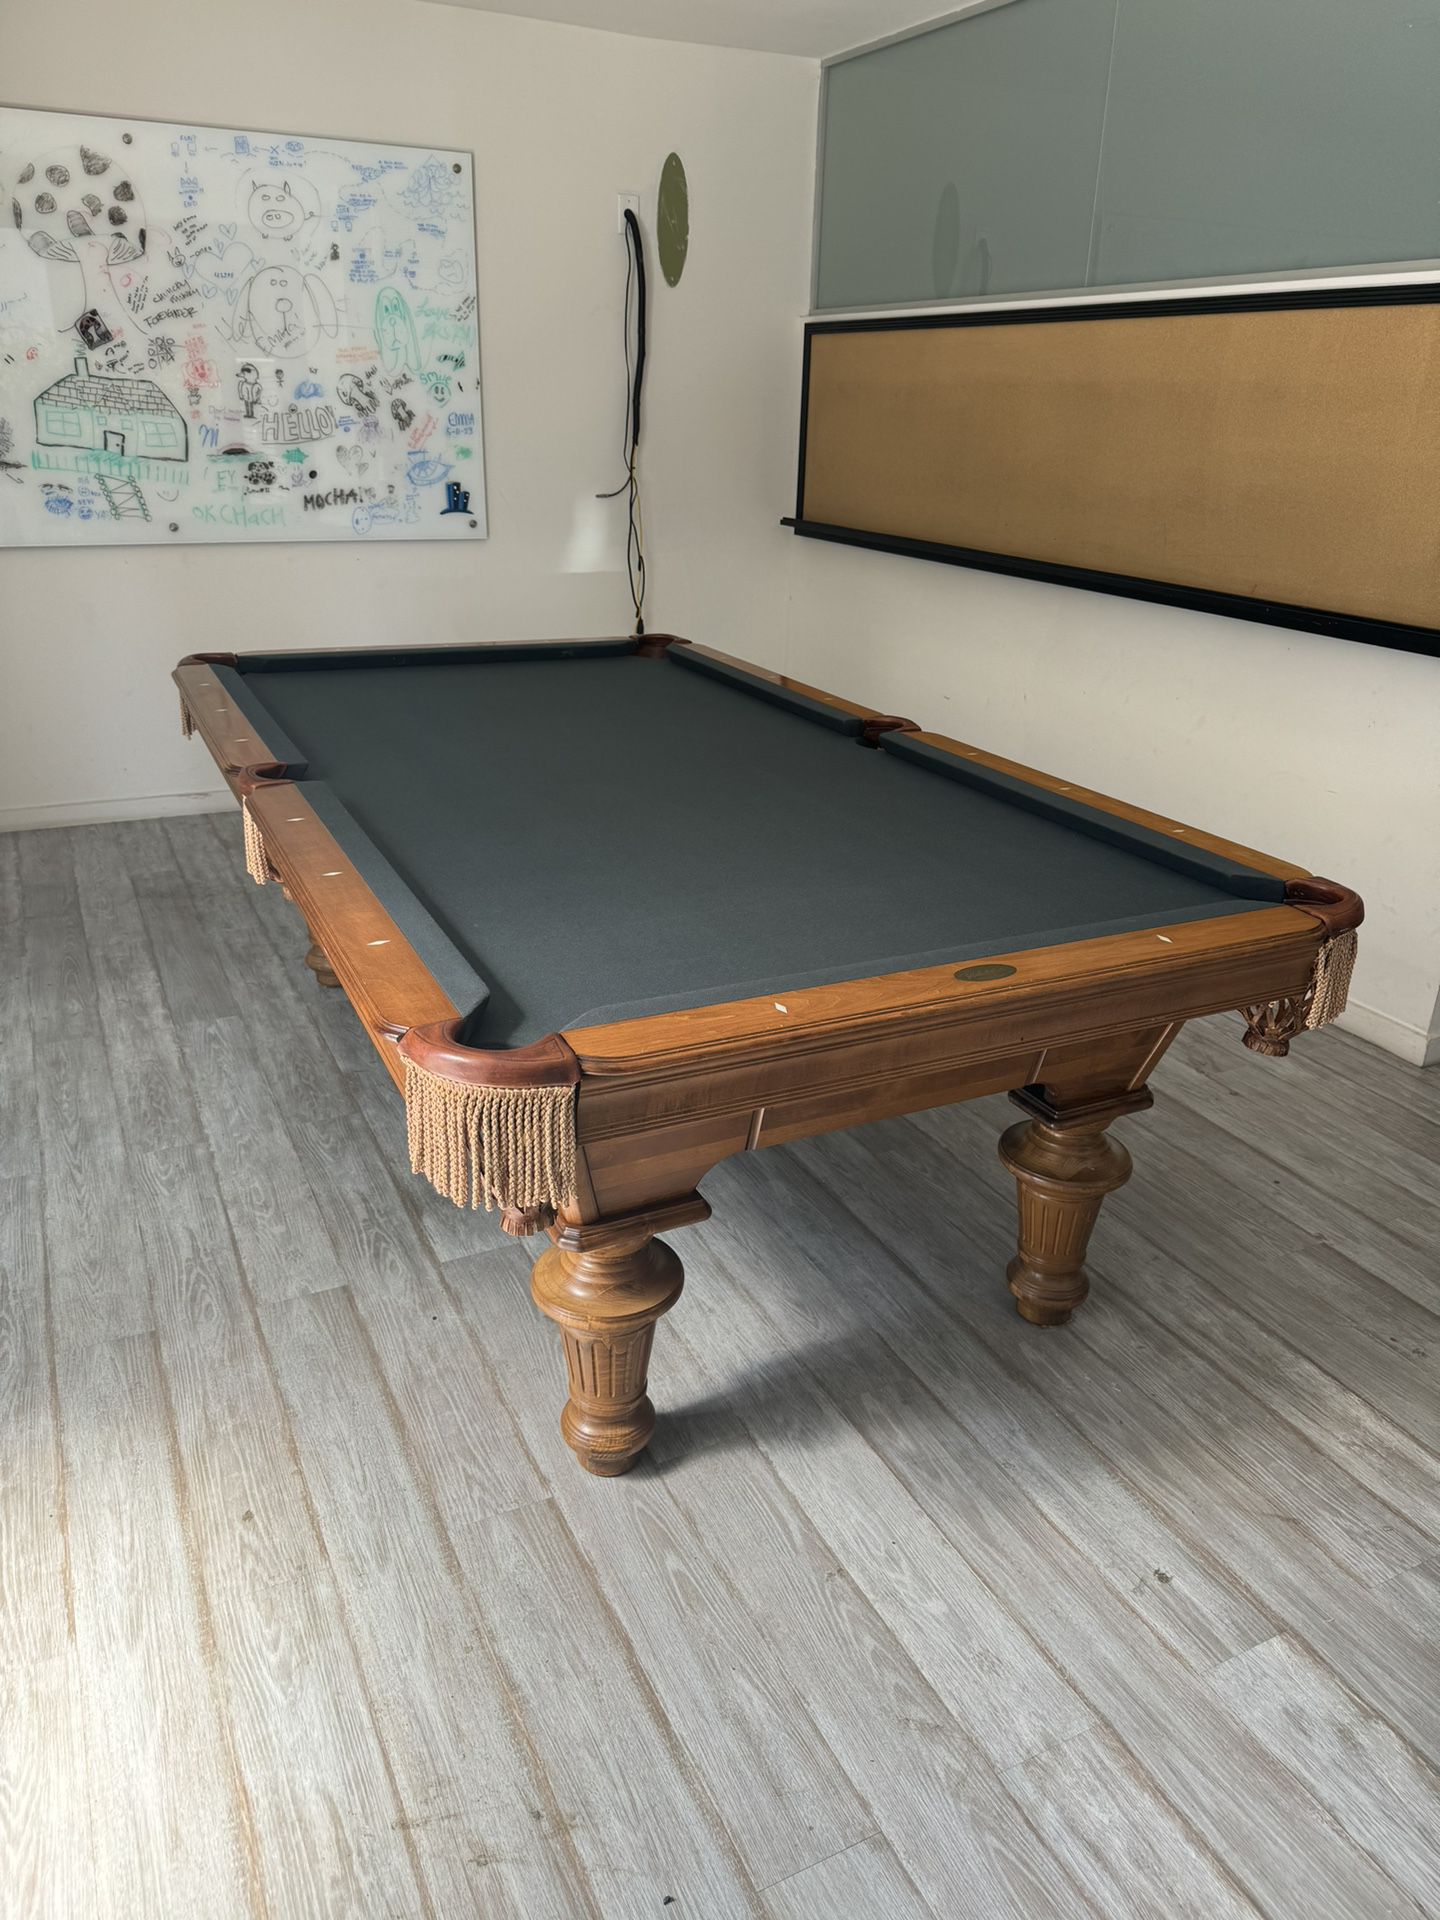 Olhausen Innsbruck Pool Table And Equipment